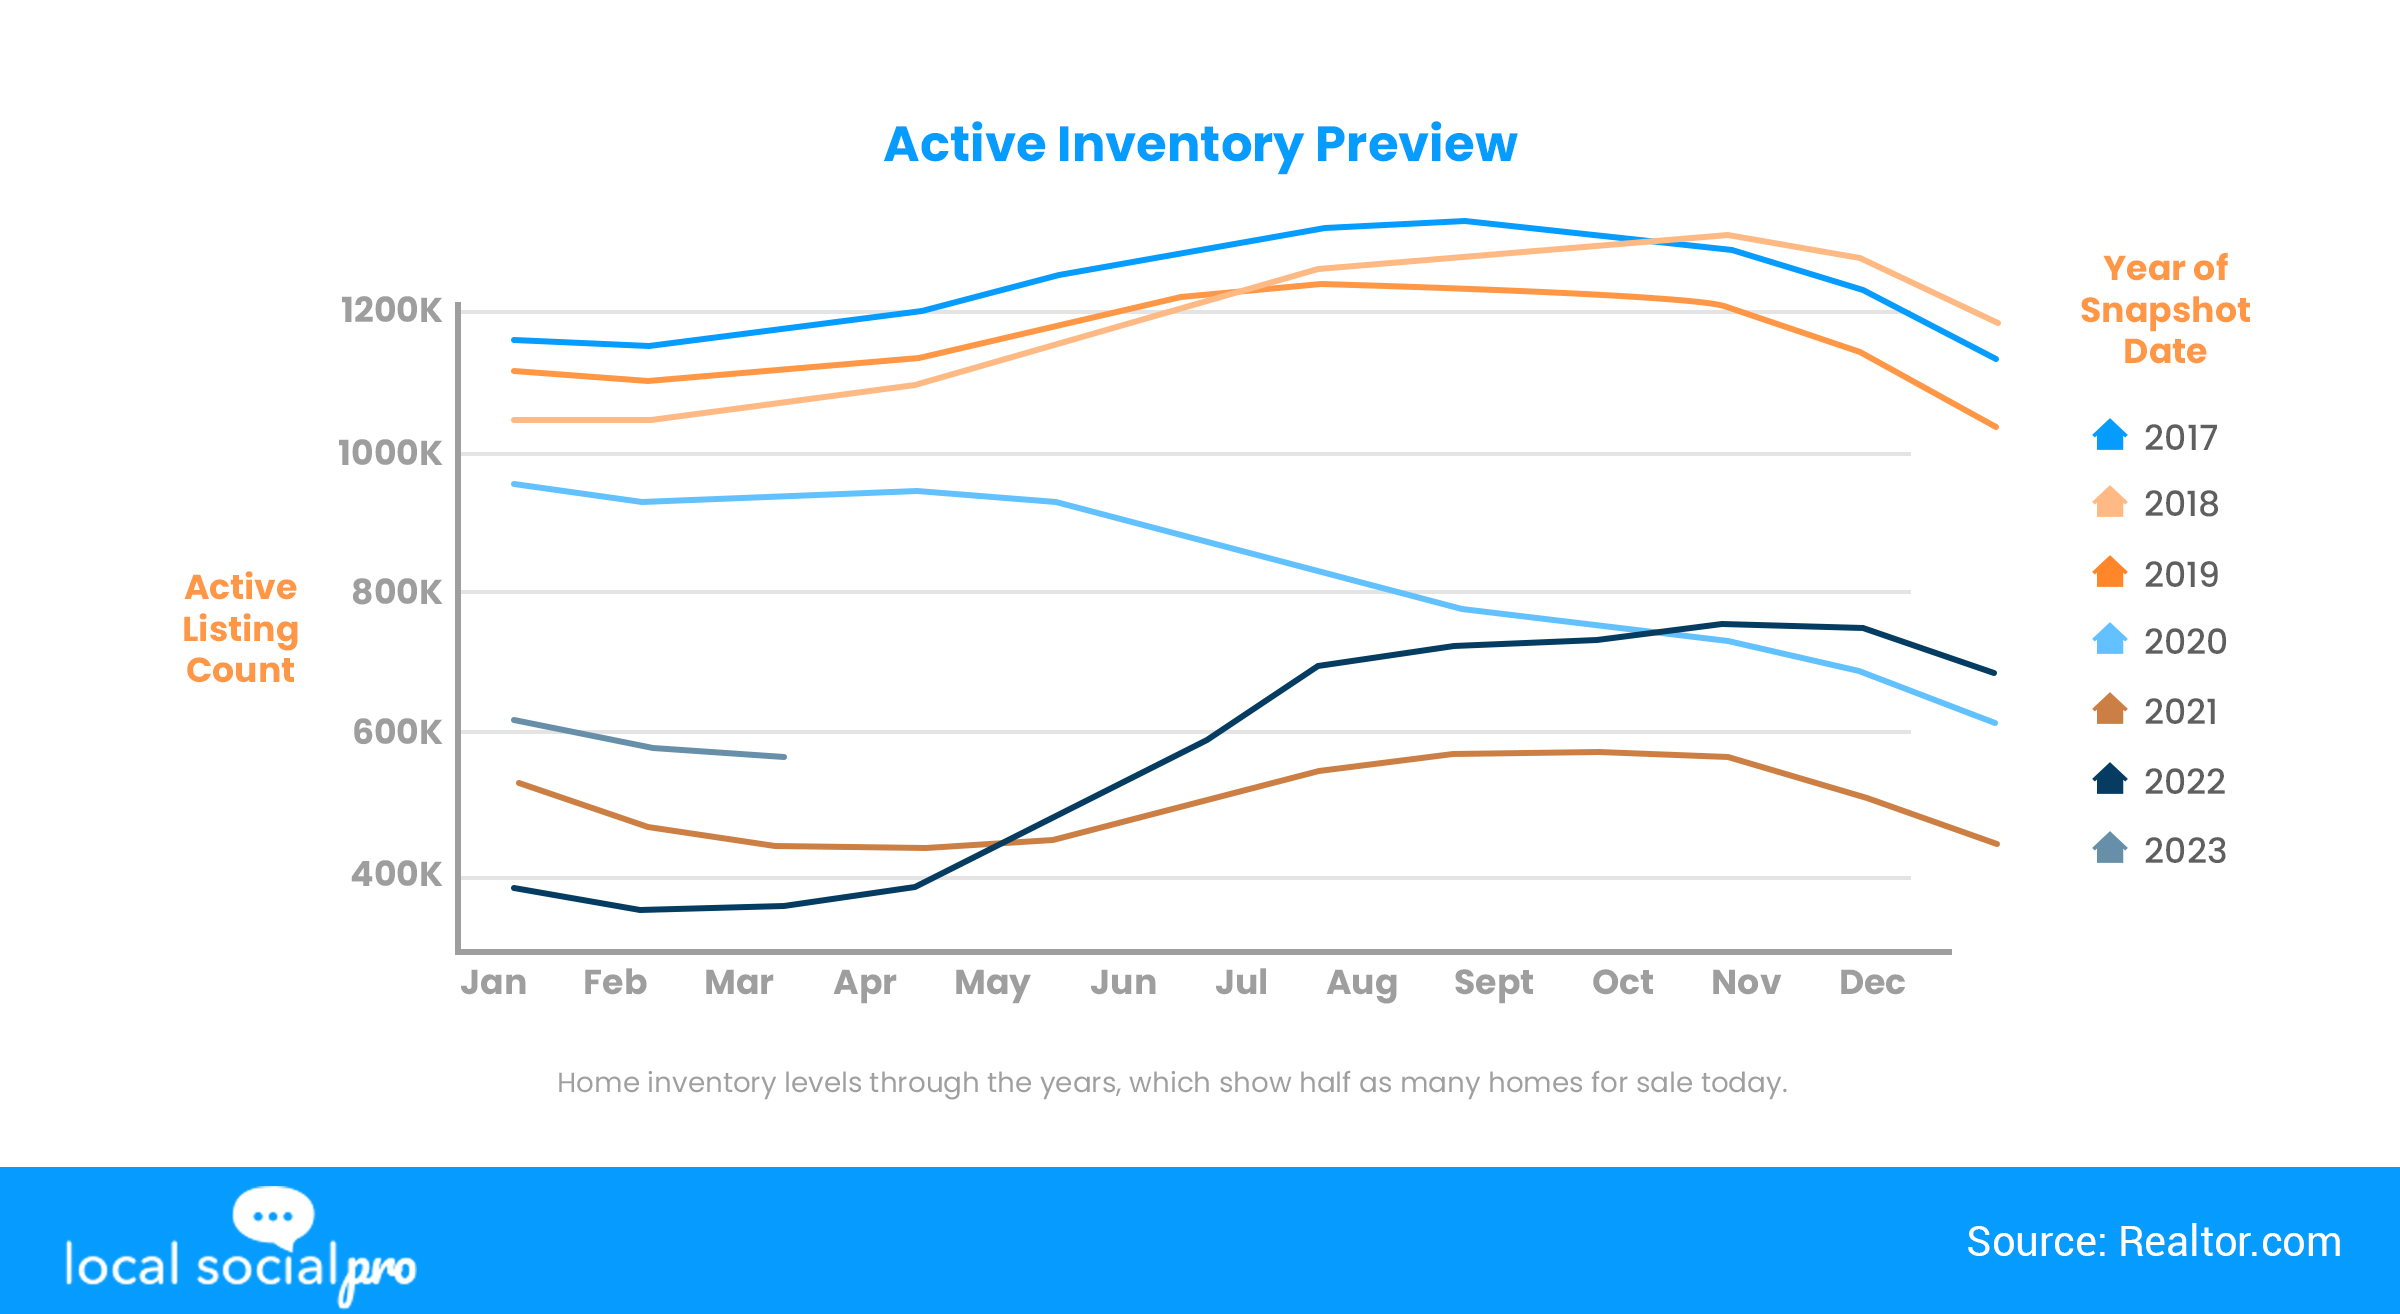 Home inventory levels through the years, which show half as many homes for sale today